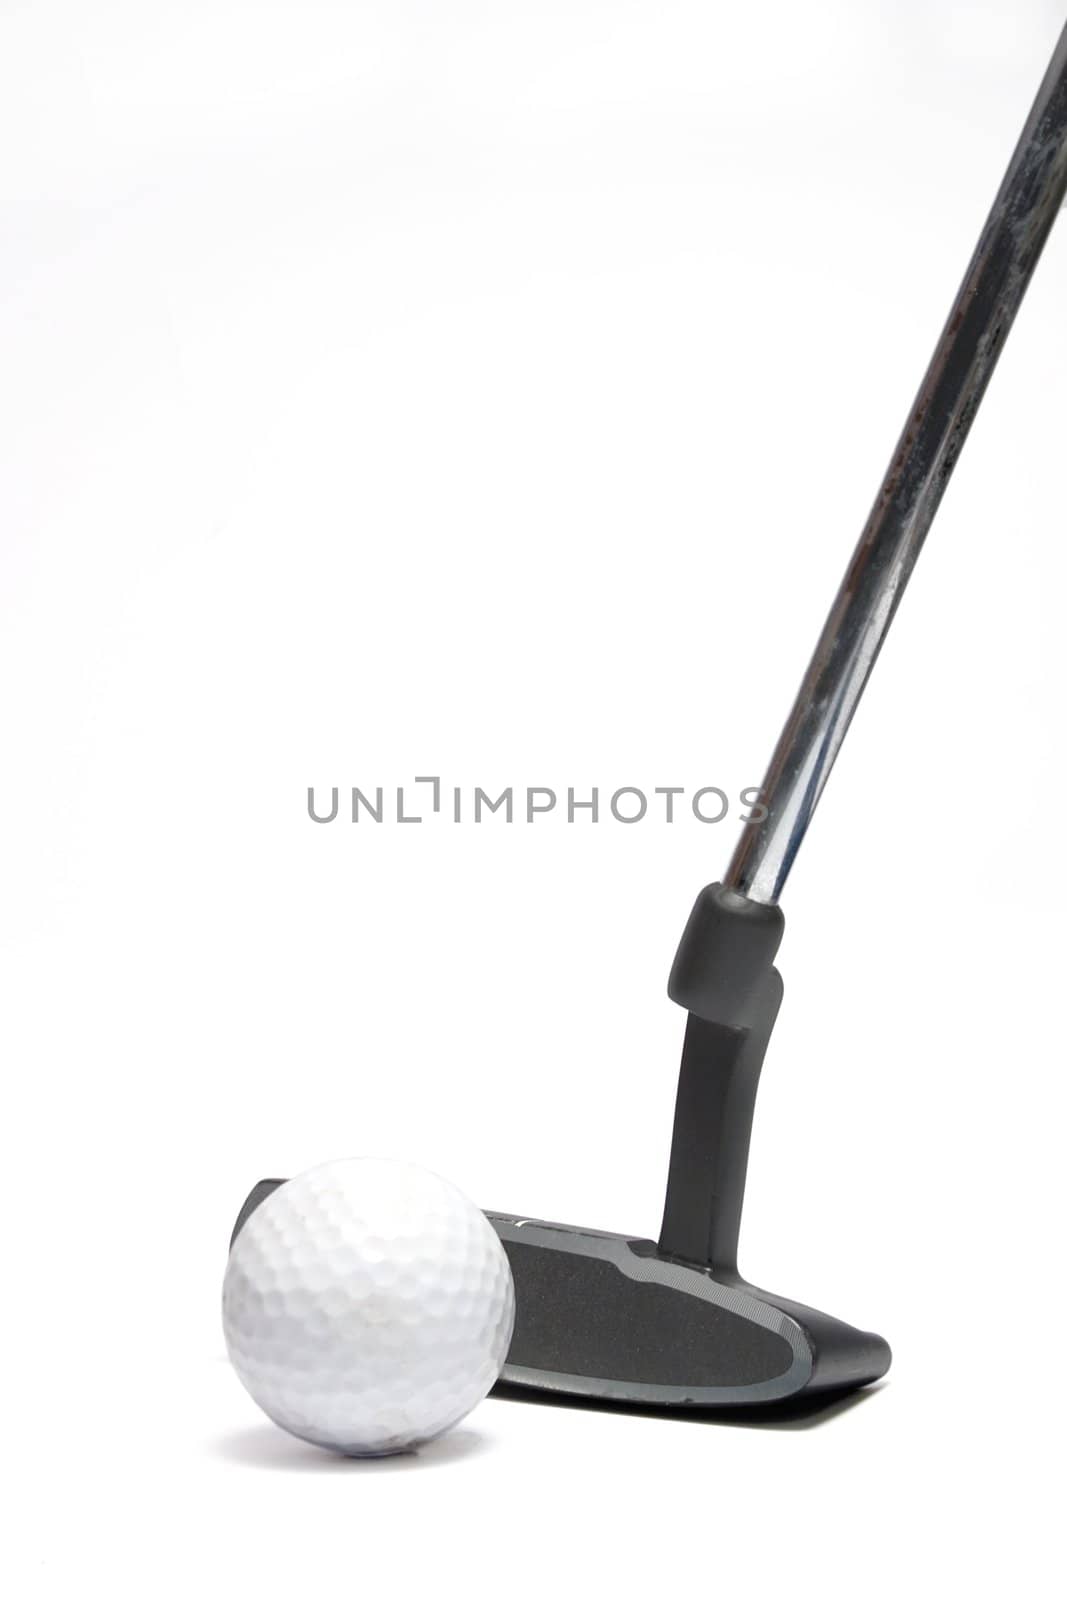 golf equipment at the white background